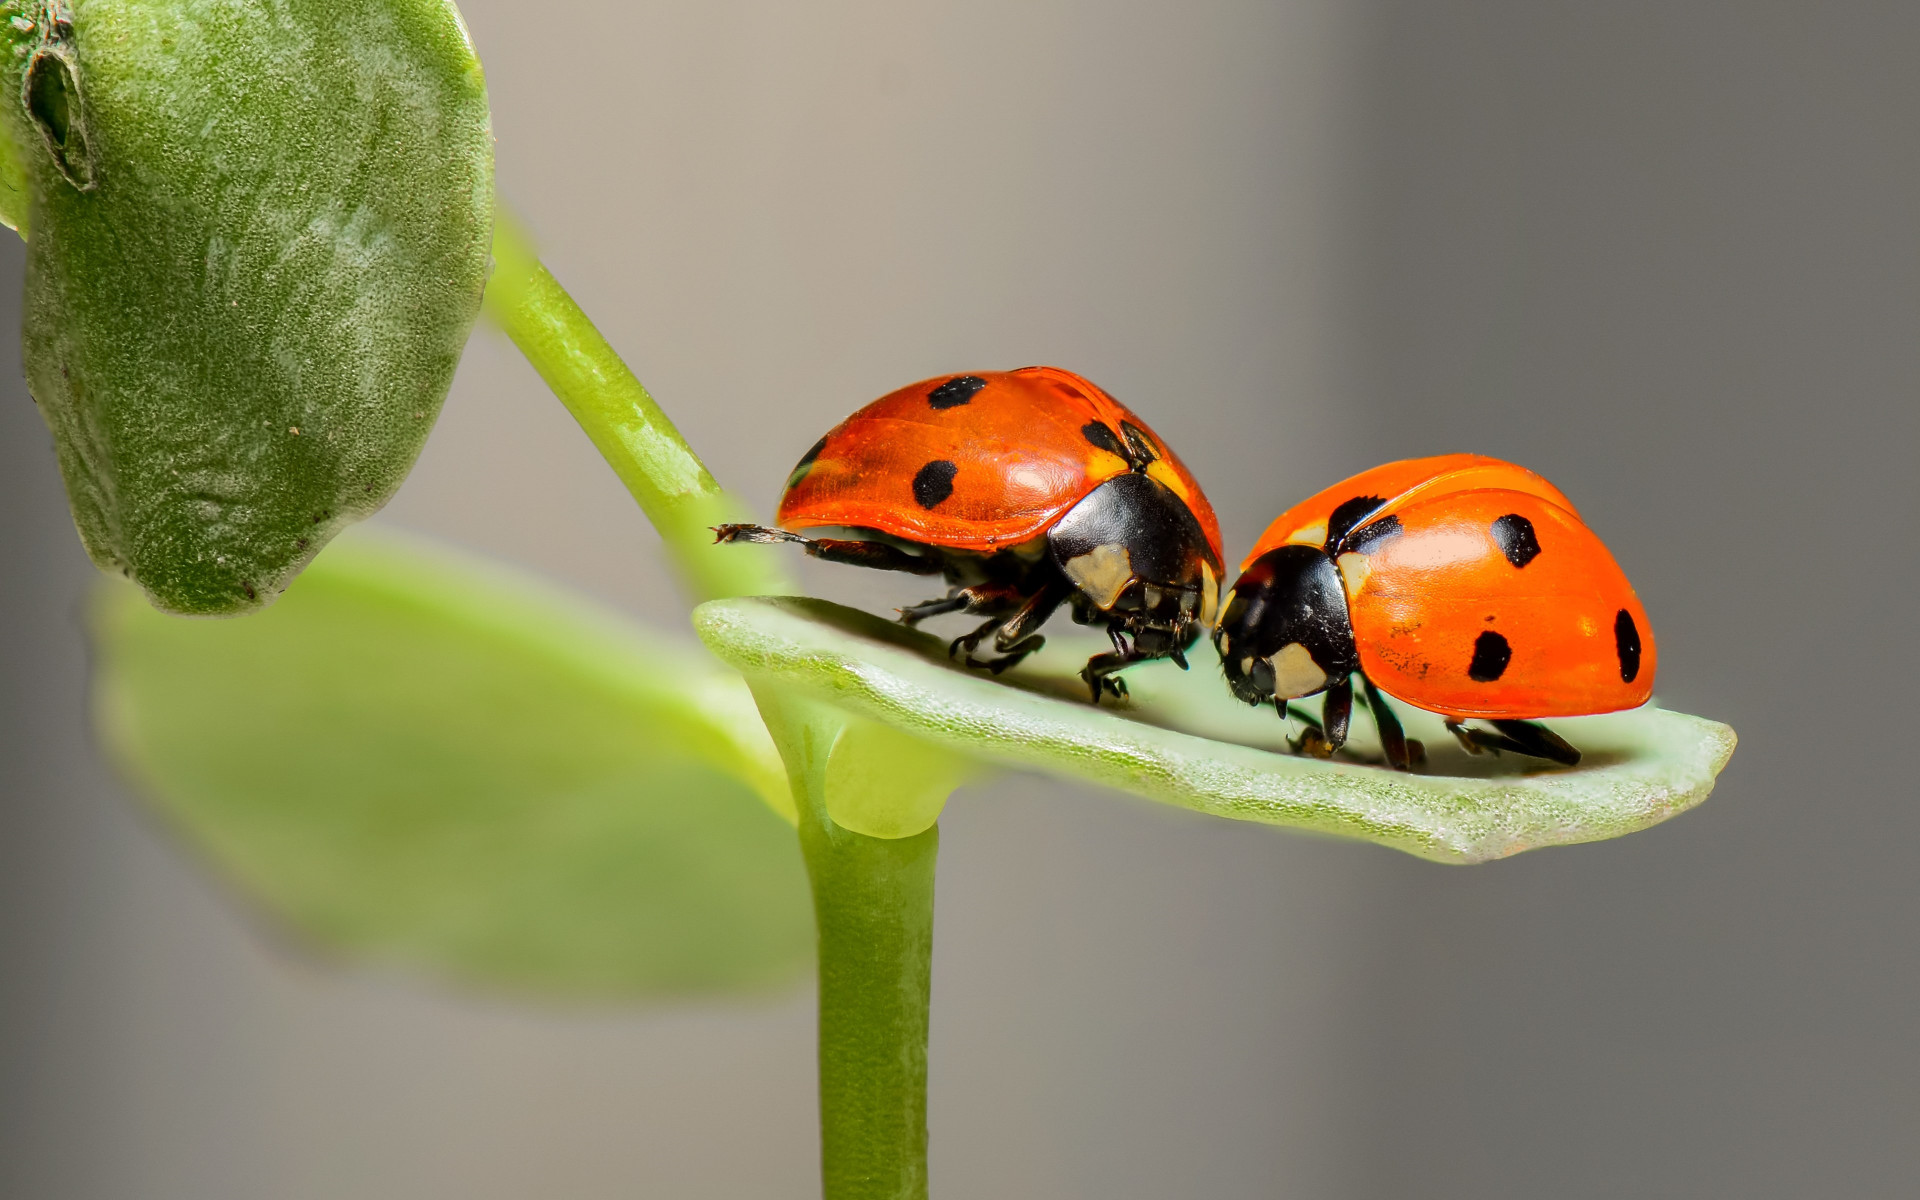 Ladybird, the insect wallpaper 1920x1200